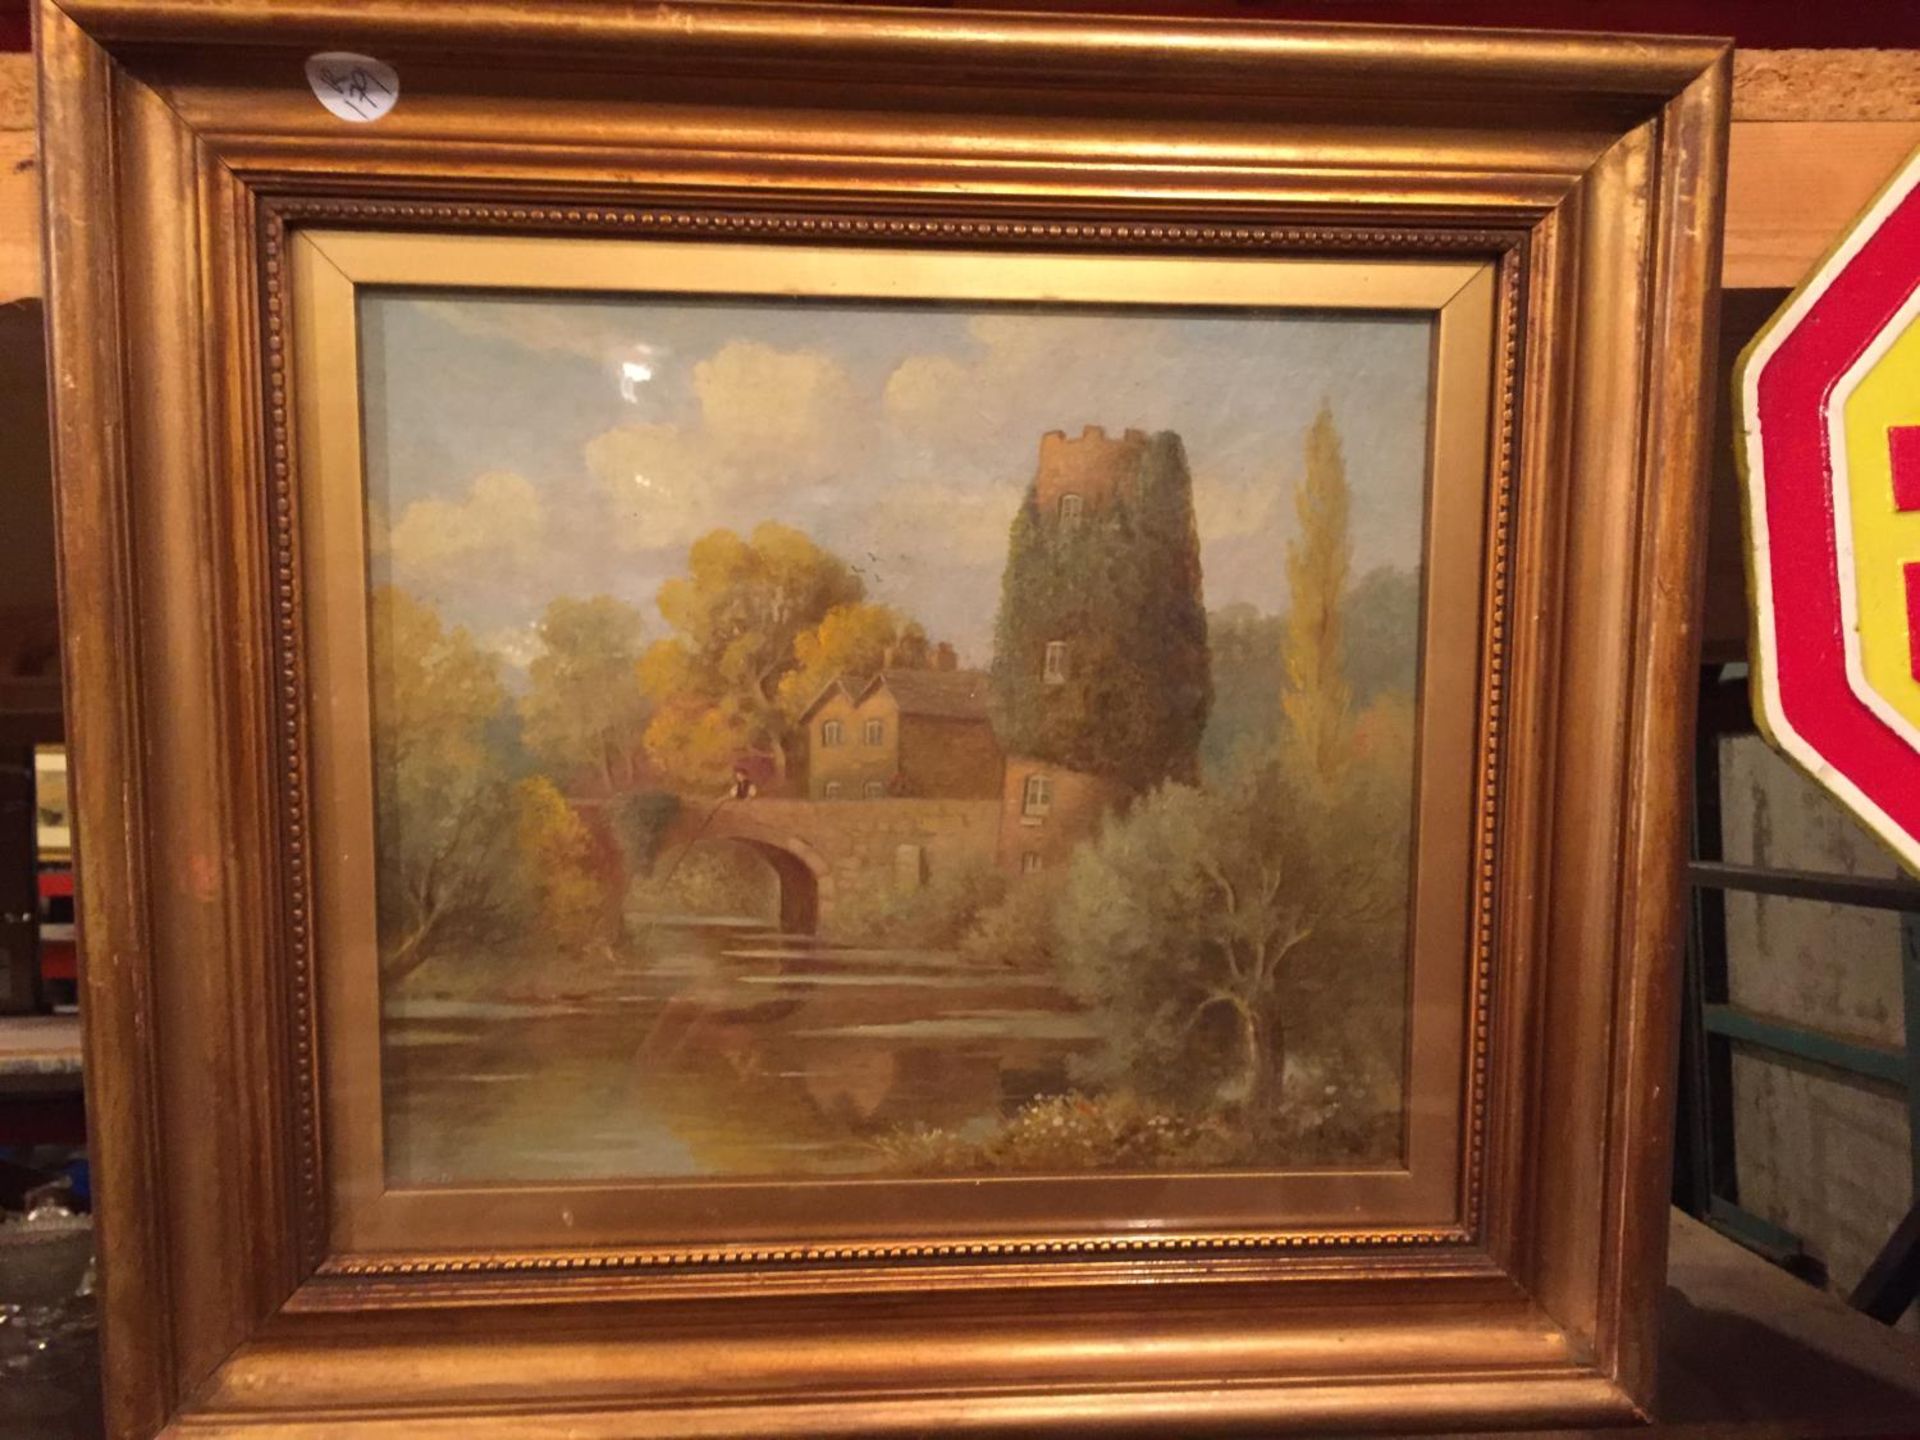 A GILT FRAMED OIL ON BOARD OF A MAN ON A BRIDGE FISHING. SIGNED H JAPMAN?? 1918 - Image 2 of 2